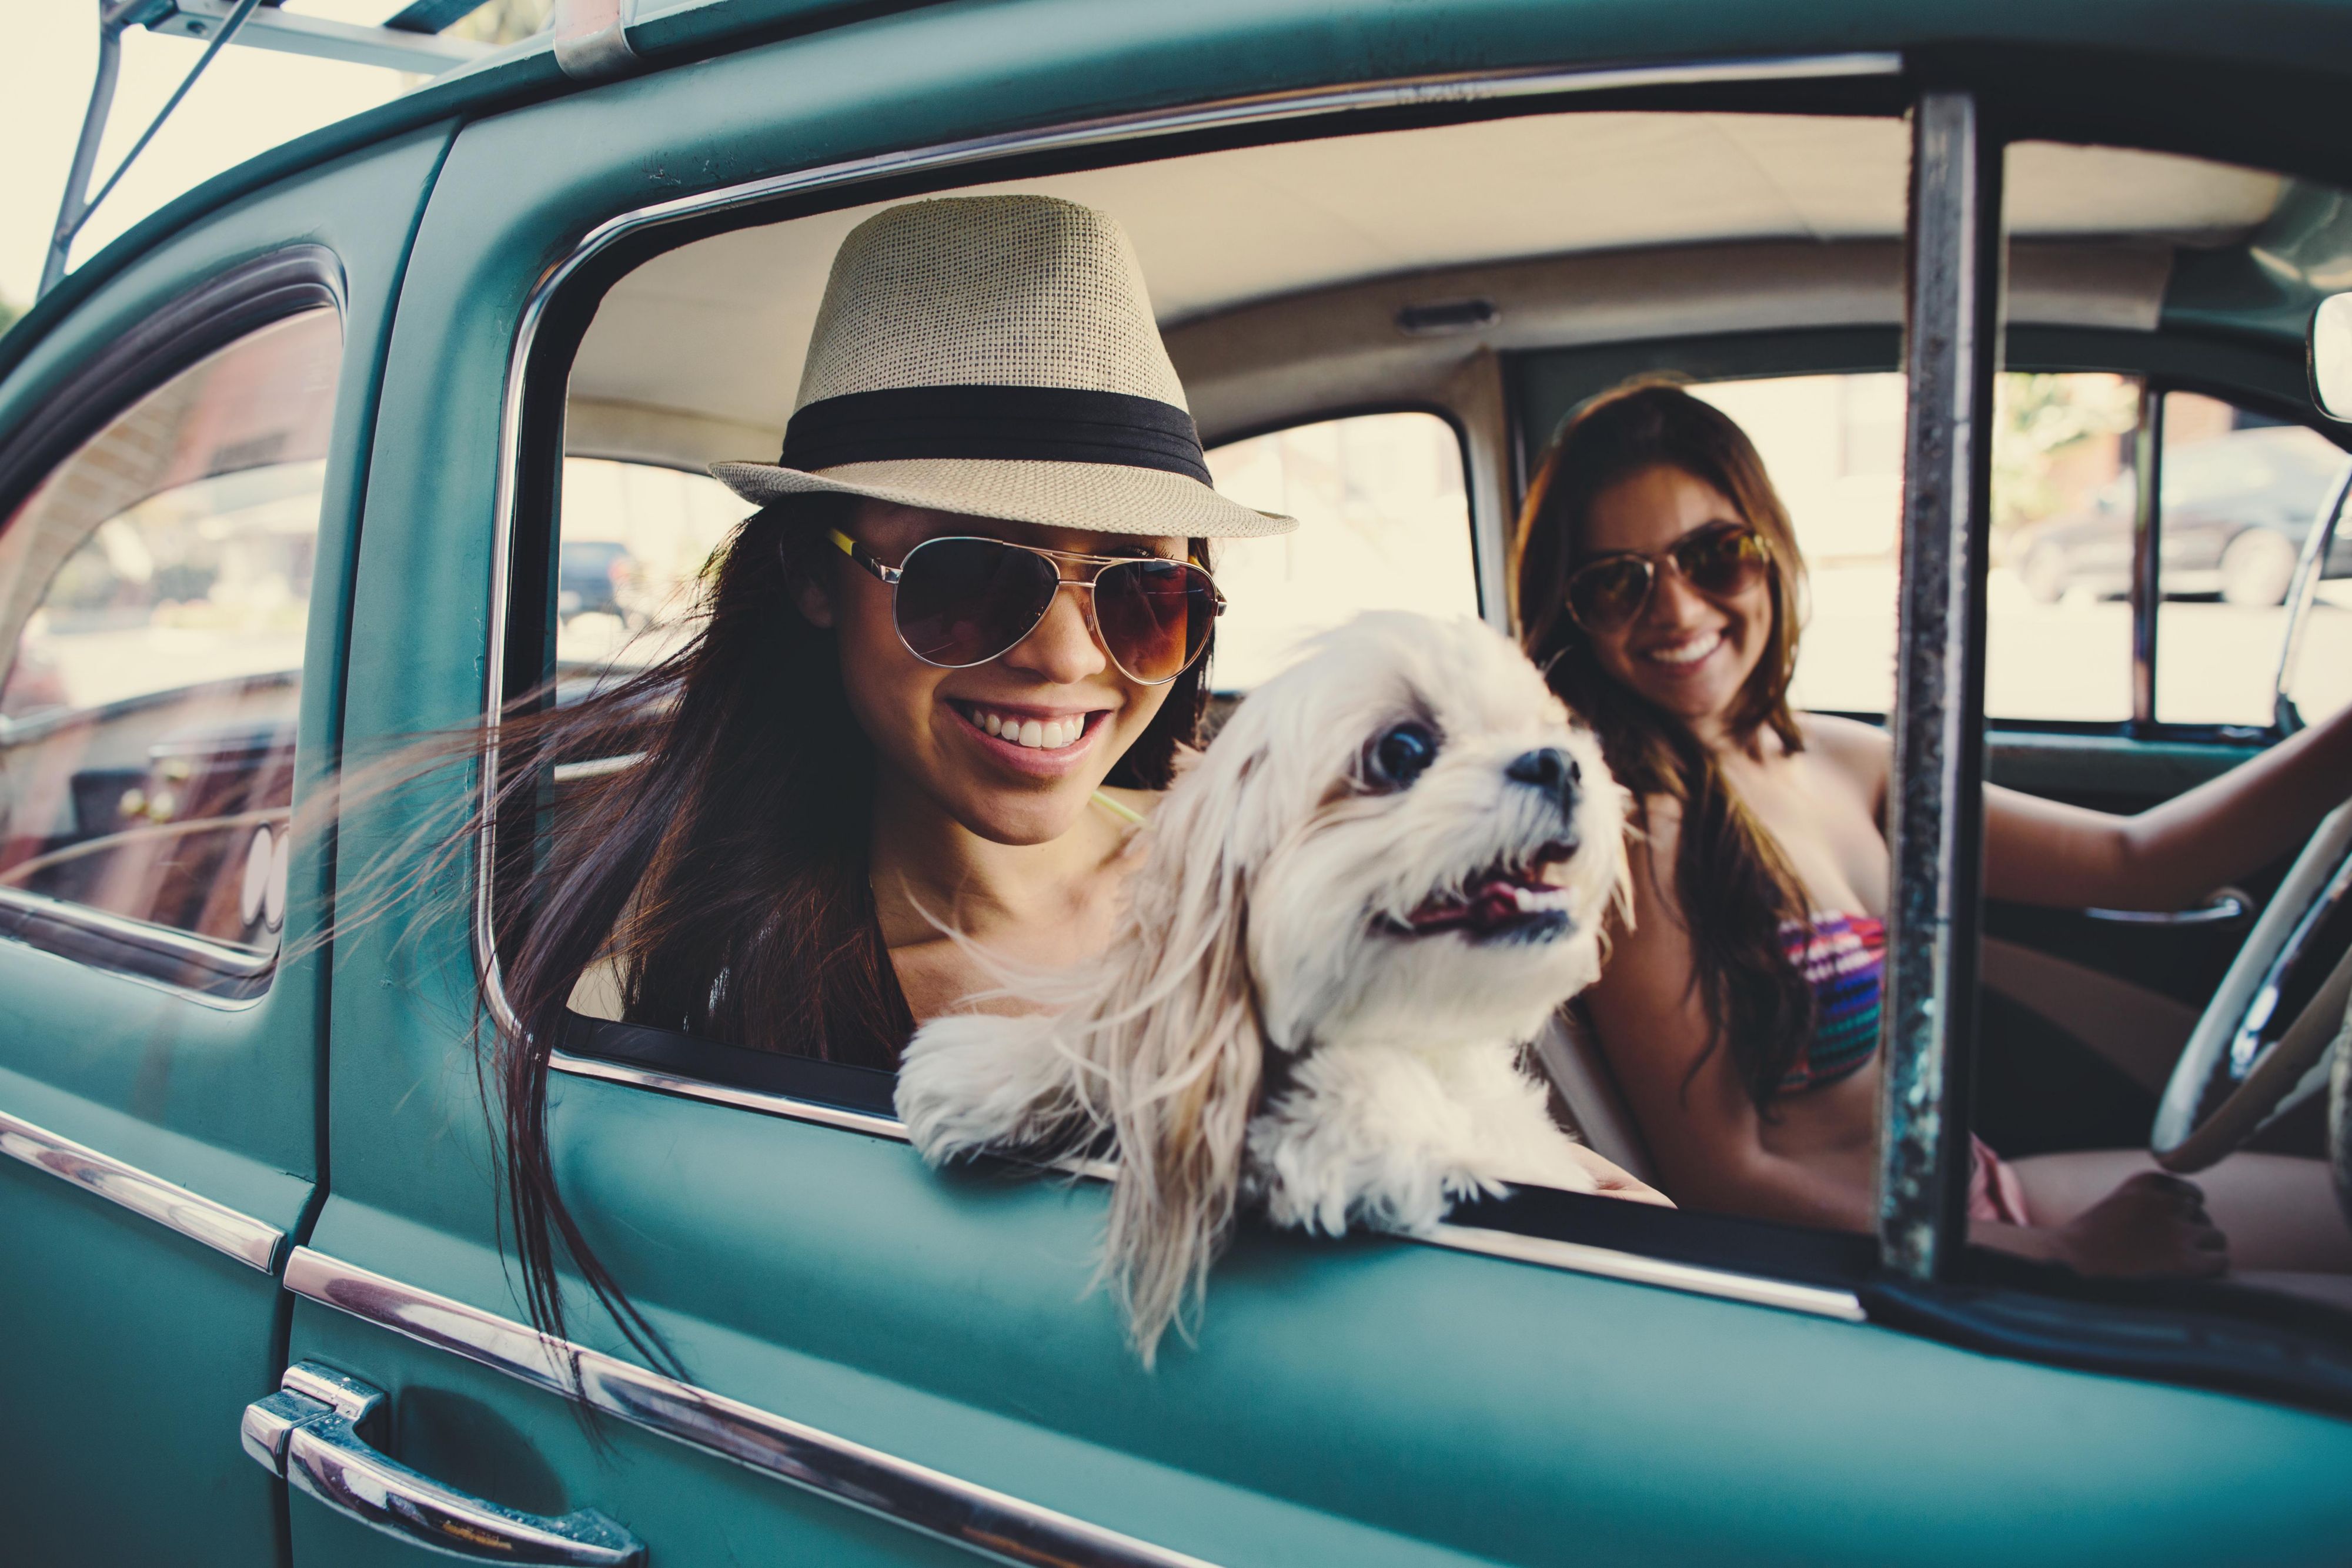 Bring your dog along on your South Florida vacation or business trip to our pet-friendly hotel in the Brickell neighborhood of Miami. We welcome dogs up to 40 pounds in rooms & suites with plenty of space to feel at home. While pets must be crated while you're away, you’ll find parks & paths for walks & fresh air just steps away. Deposit required.